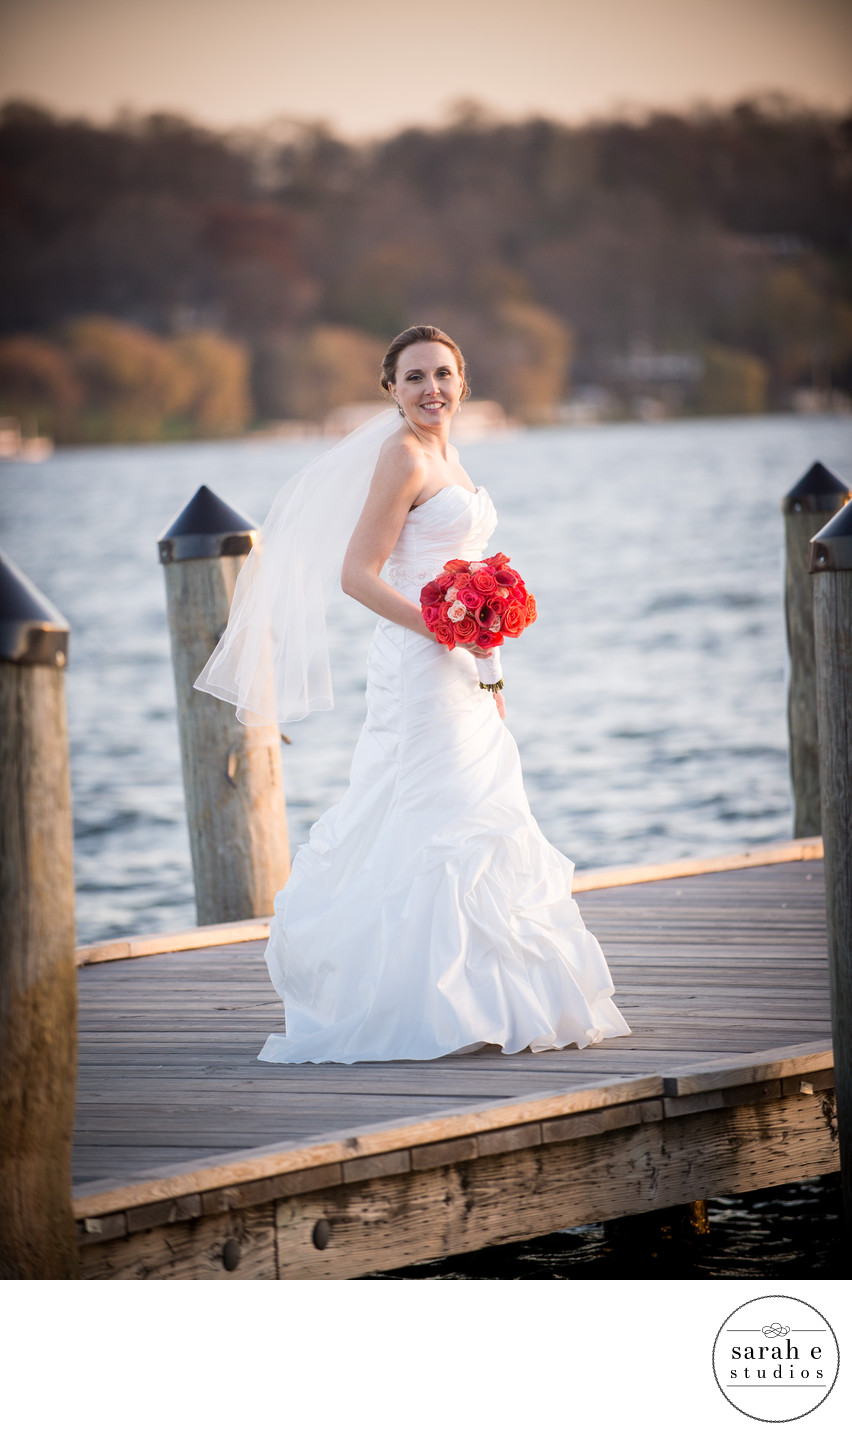 Bridal Portrait on a Dock at the Lake